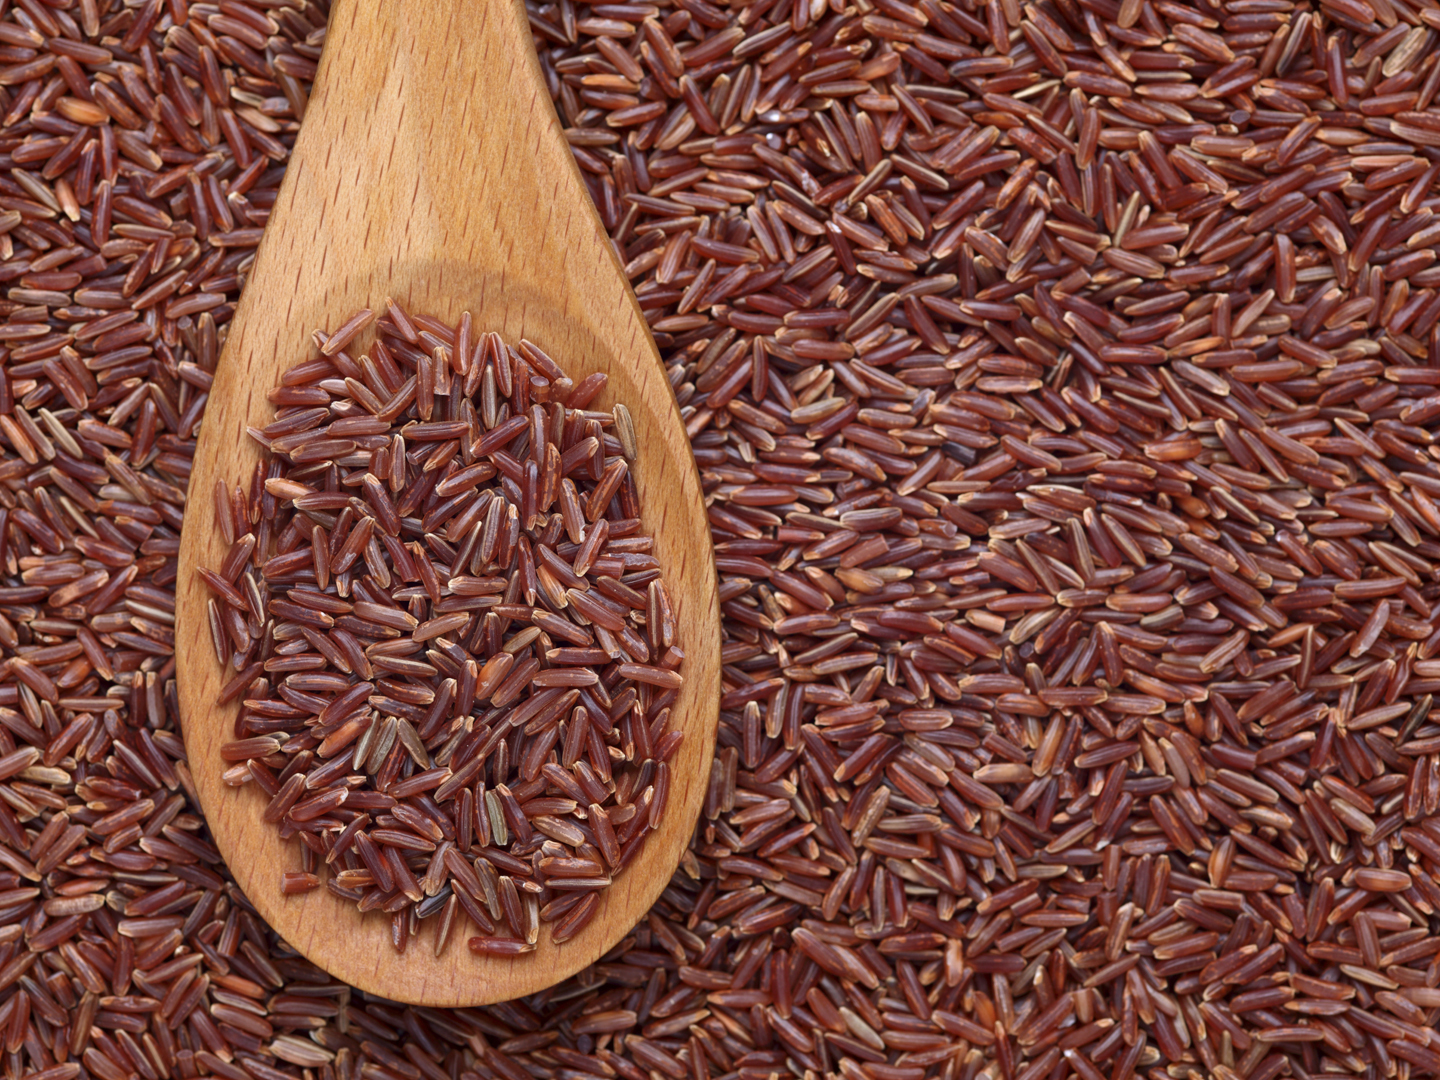 Red rice in a wooden spoon on red rice background.Please see: